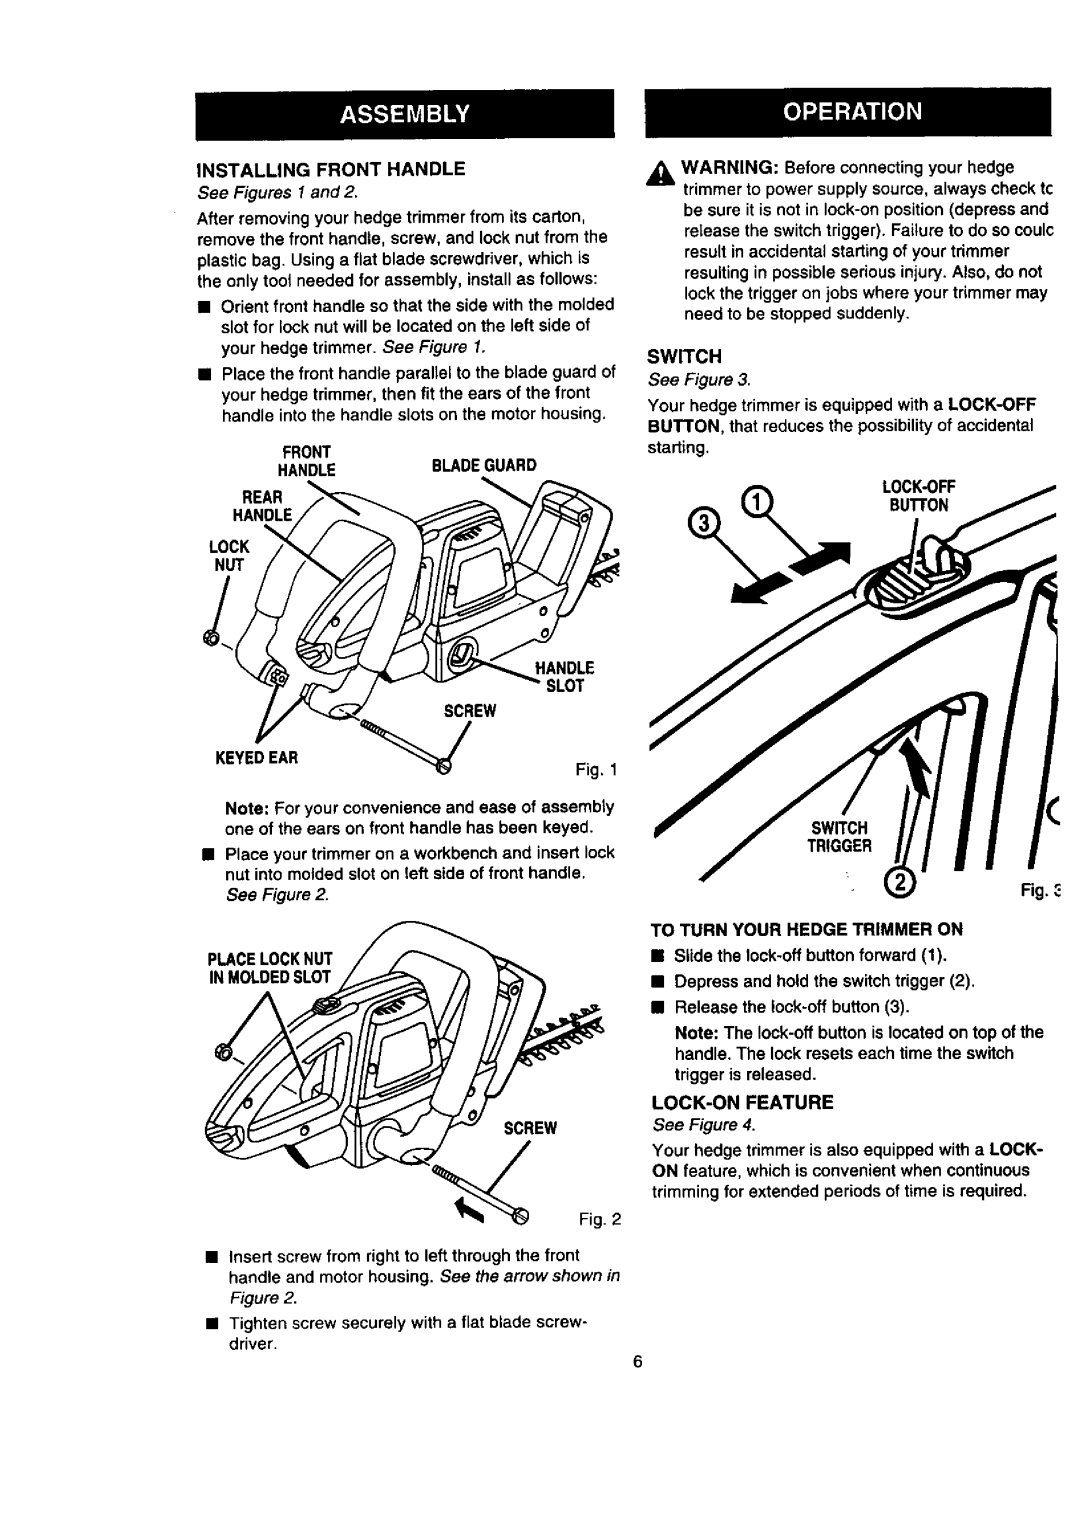 Craftsman 315.79889 owner manual Installing Front Handle, See Figures 1 and, Screw 